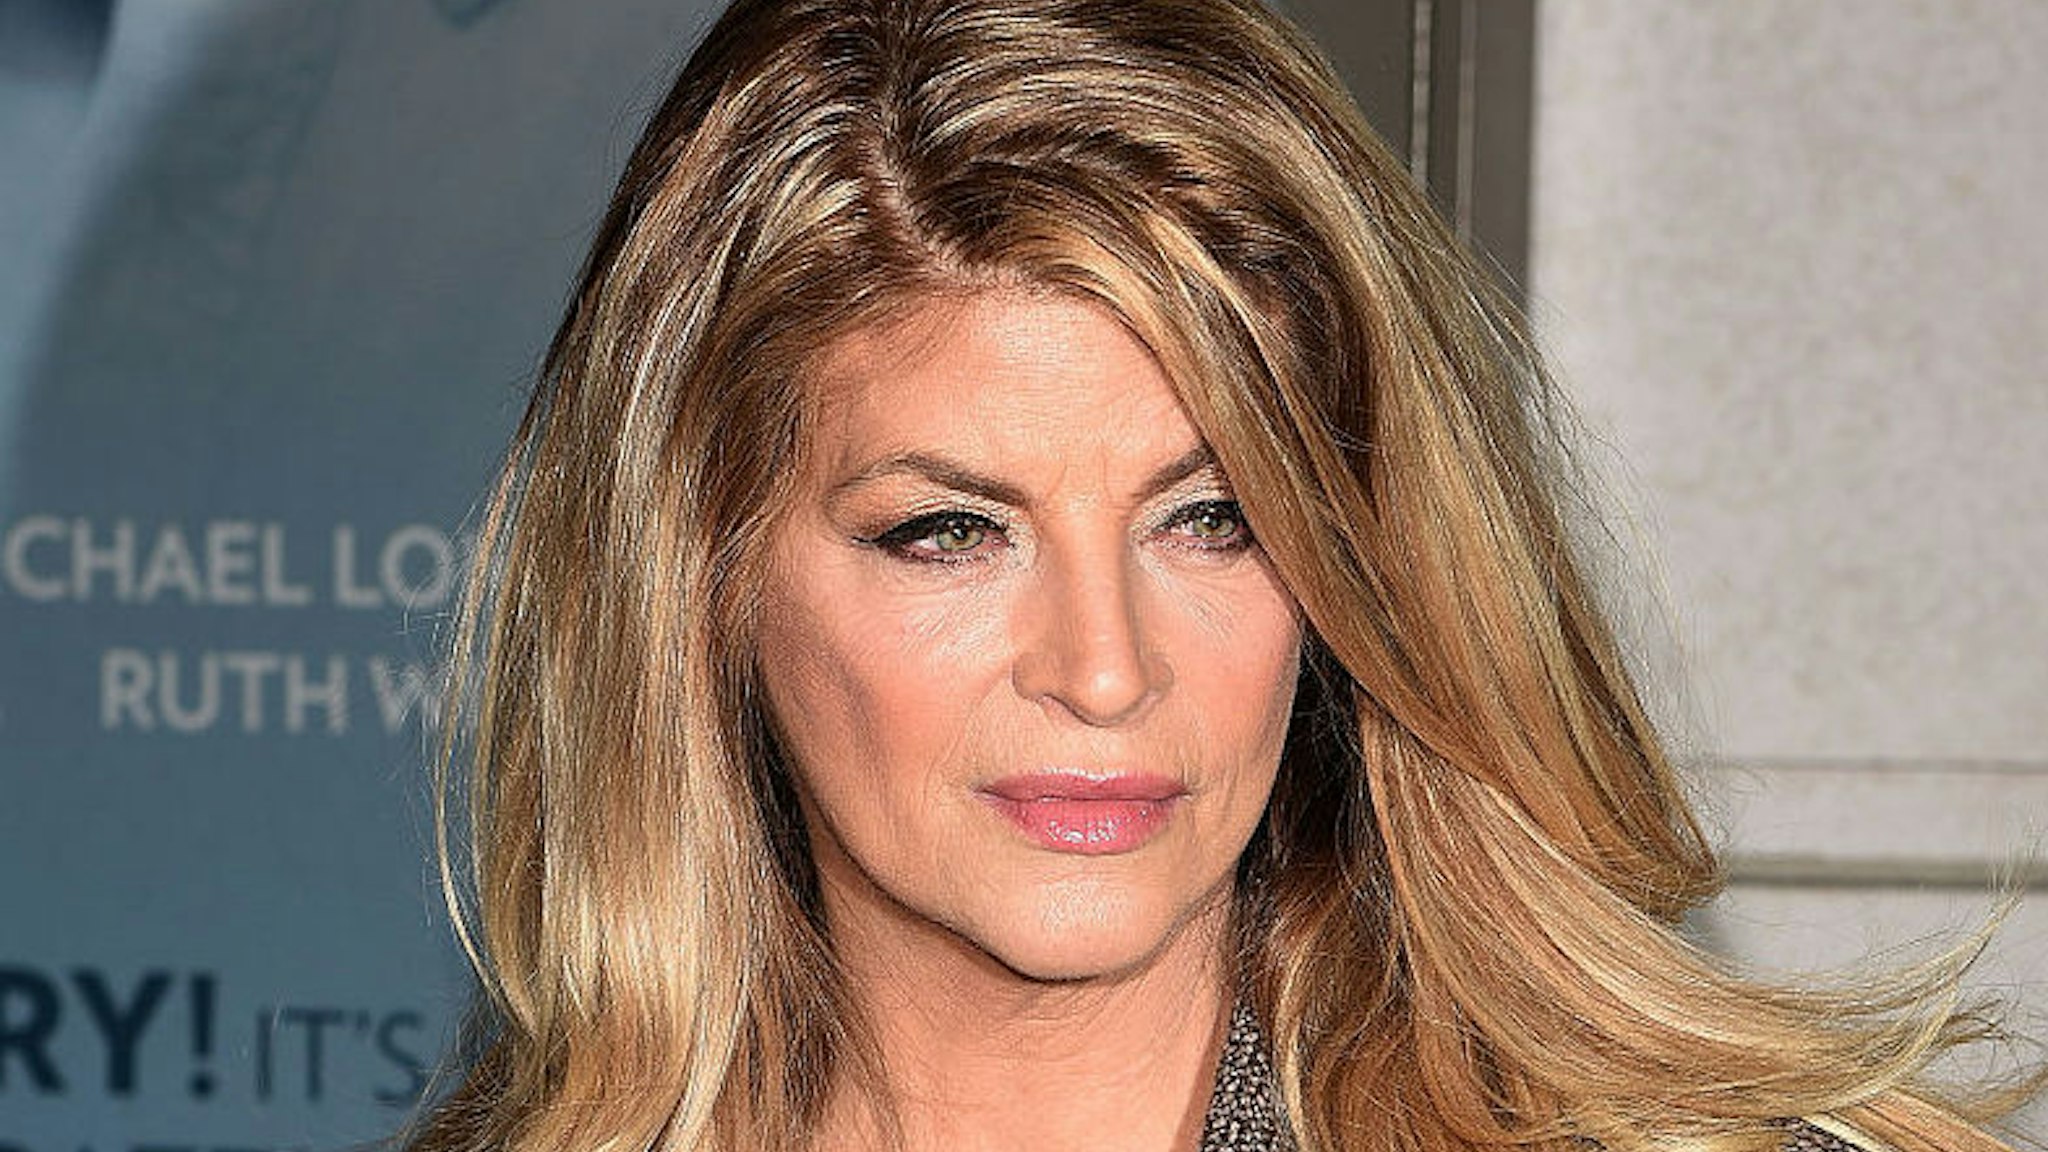 Kirstie Alley attends "Constellations" Broadway opening night at Samuel J. Friedman Theatre on January 13, 2015 in New York City.